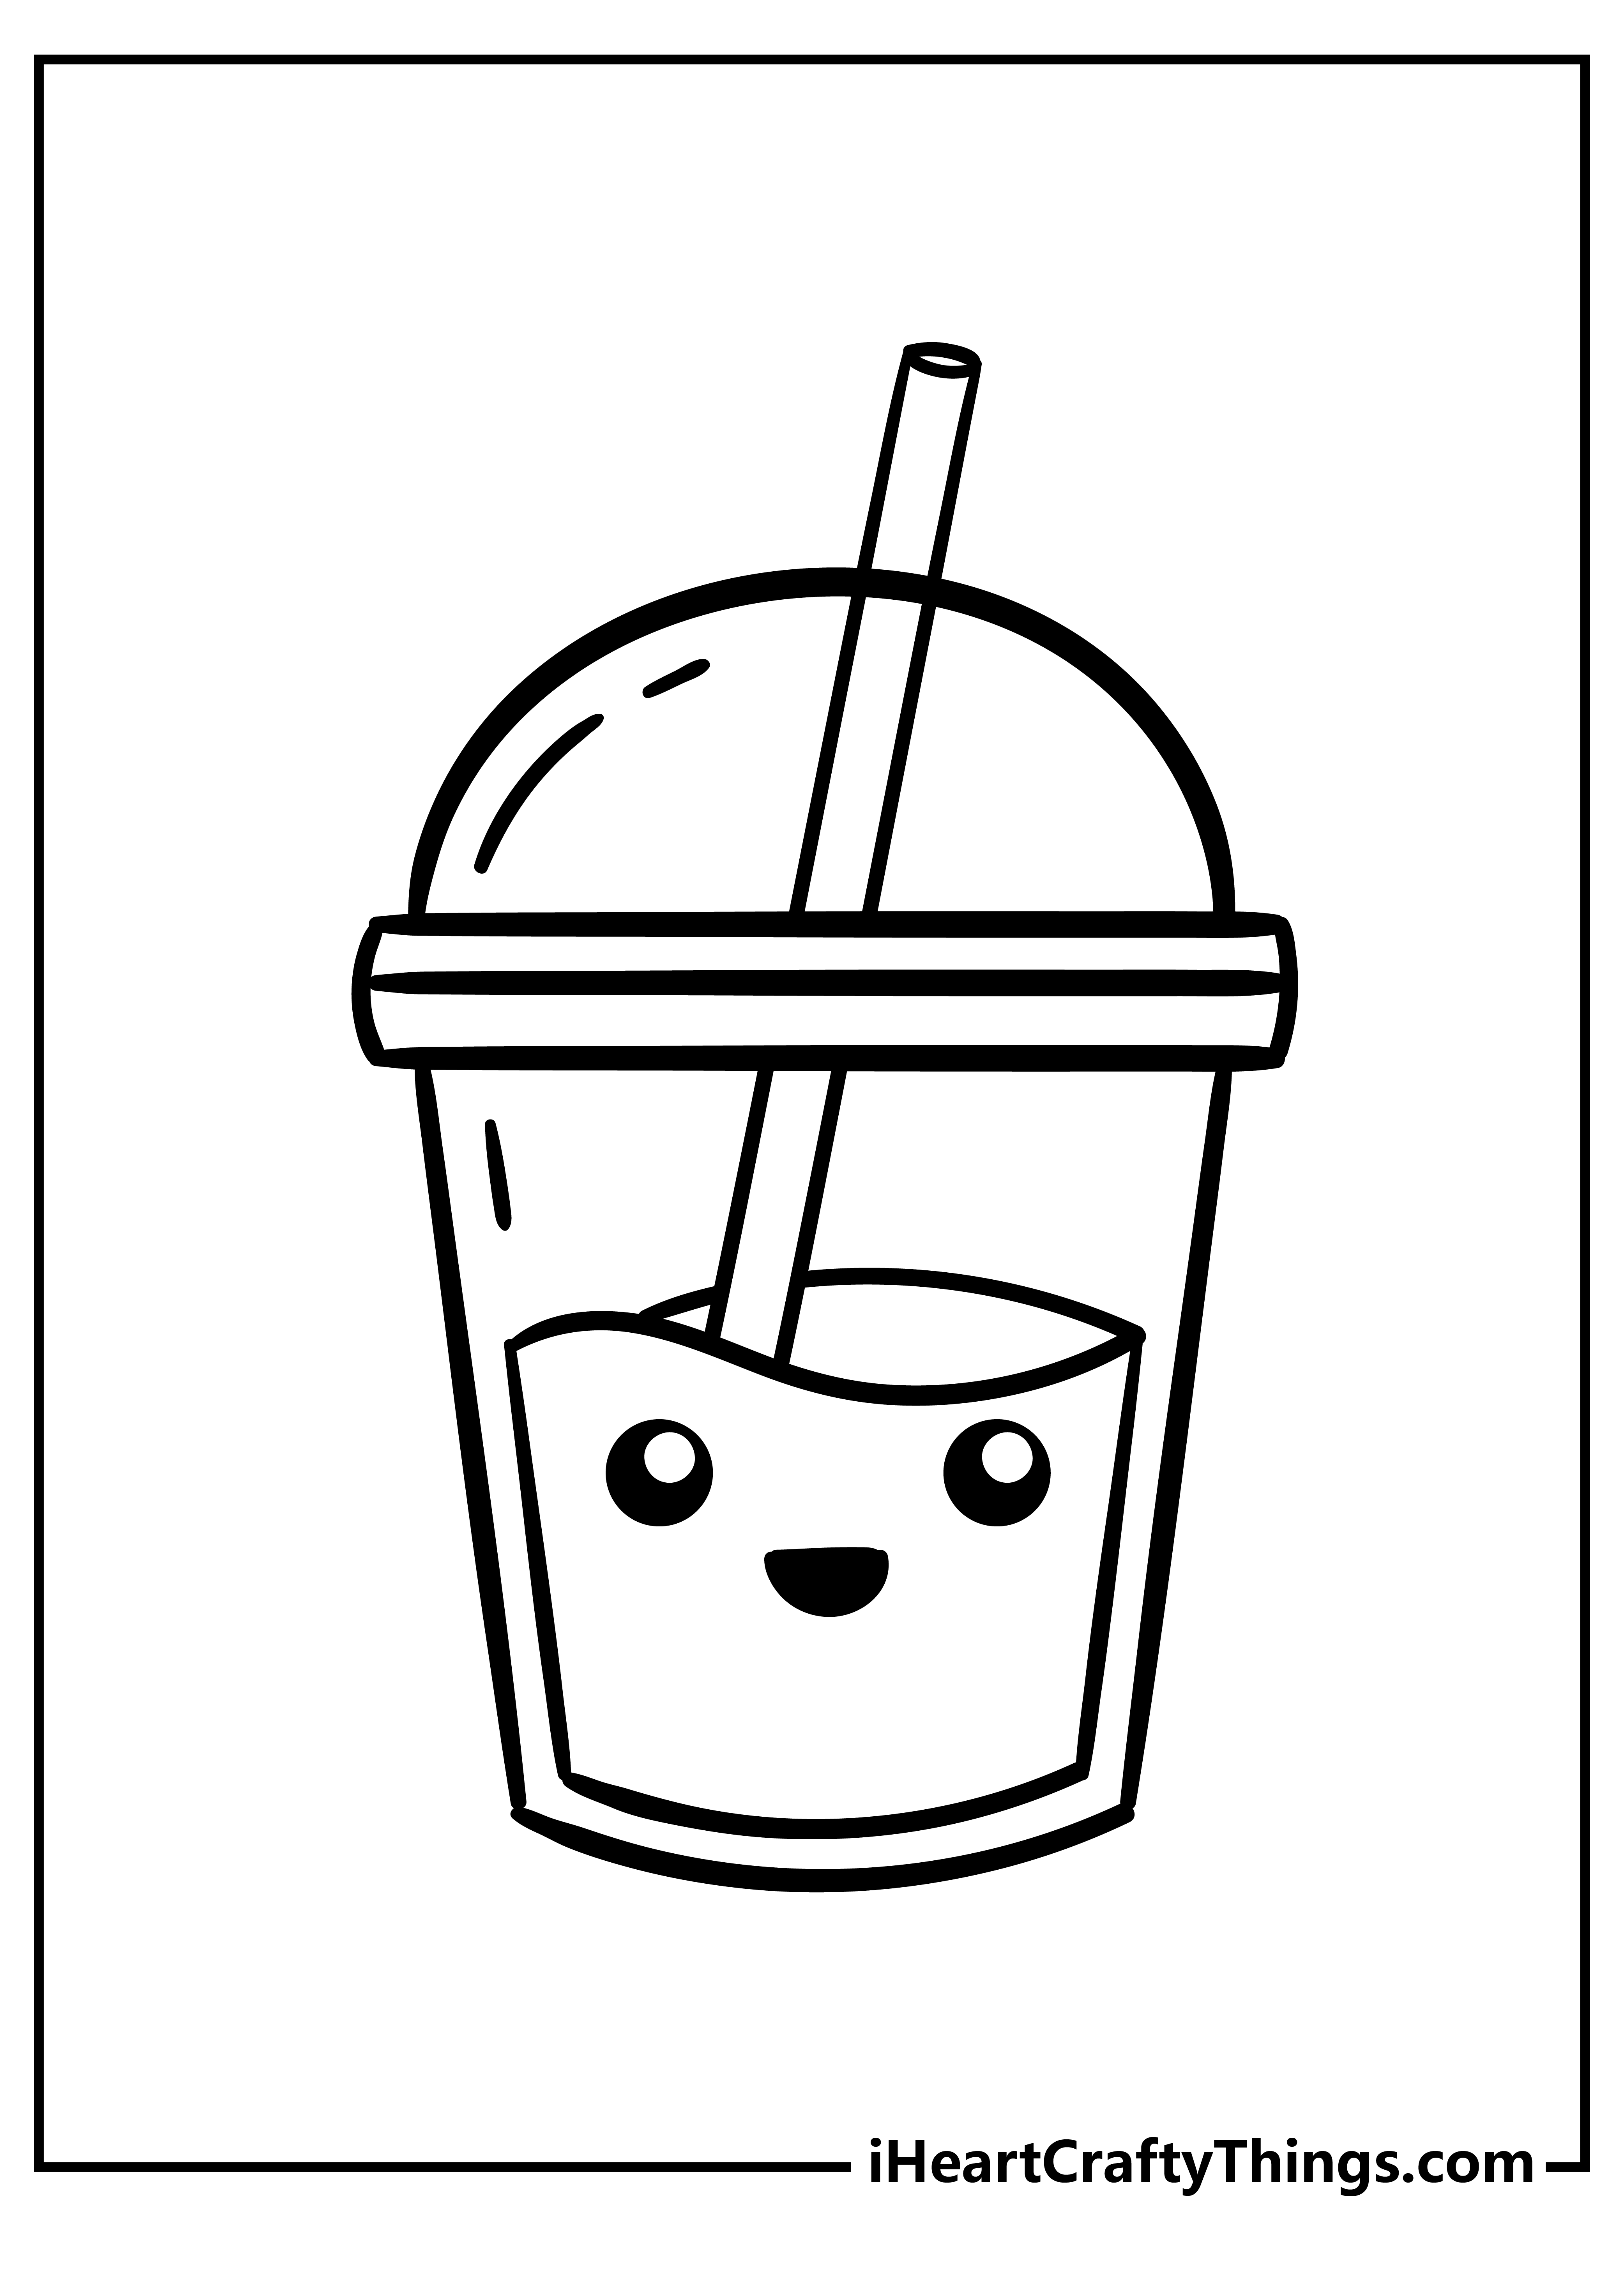 Printable Cute Food Coloring Pages Updated 20